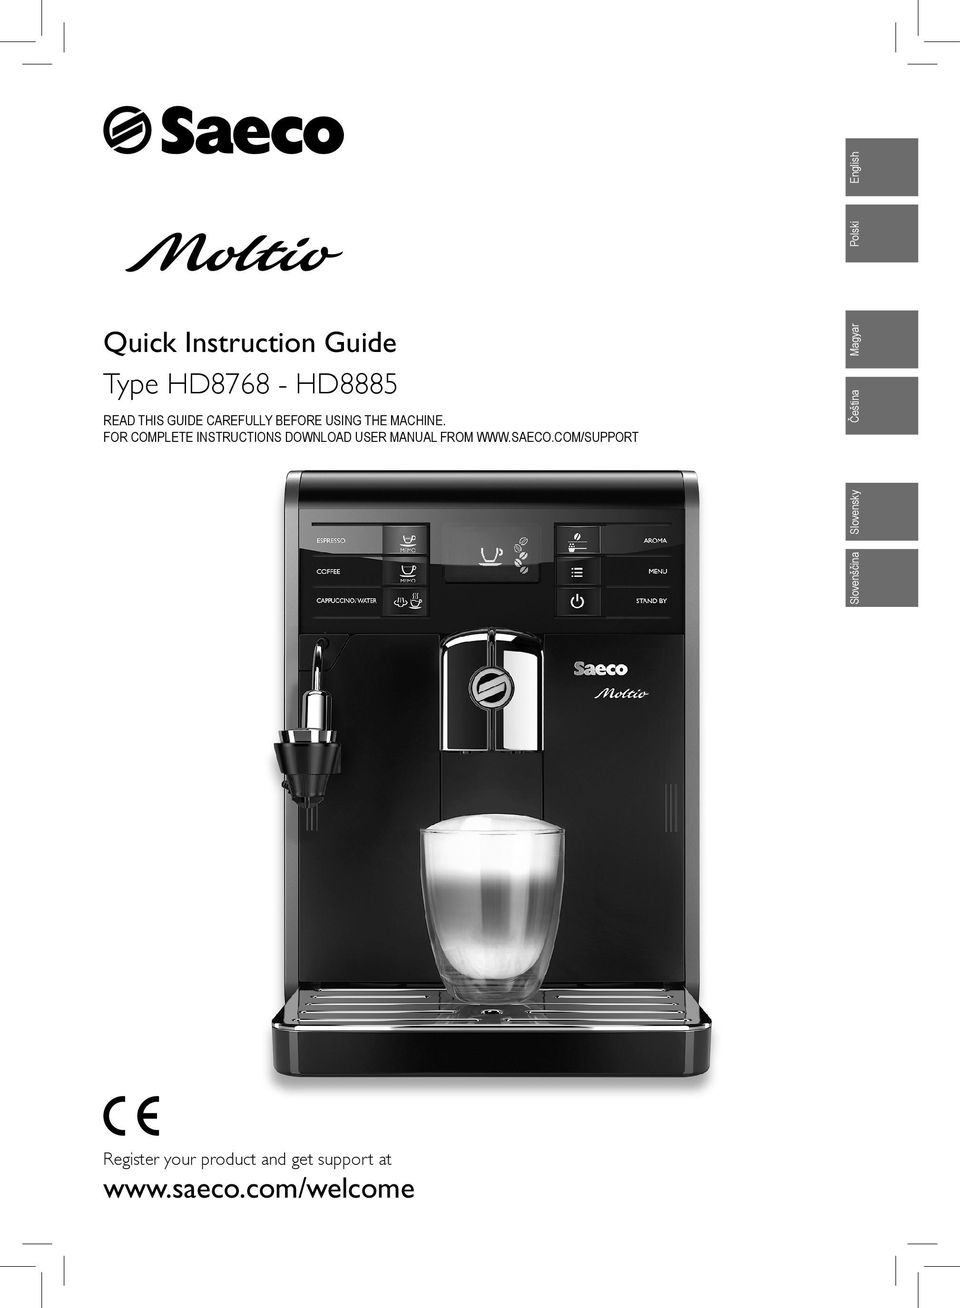 FOR COMETE INSTRUCTIONS DOWNLOAD USER MANUAL FROM WWW.SAECO.